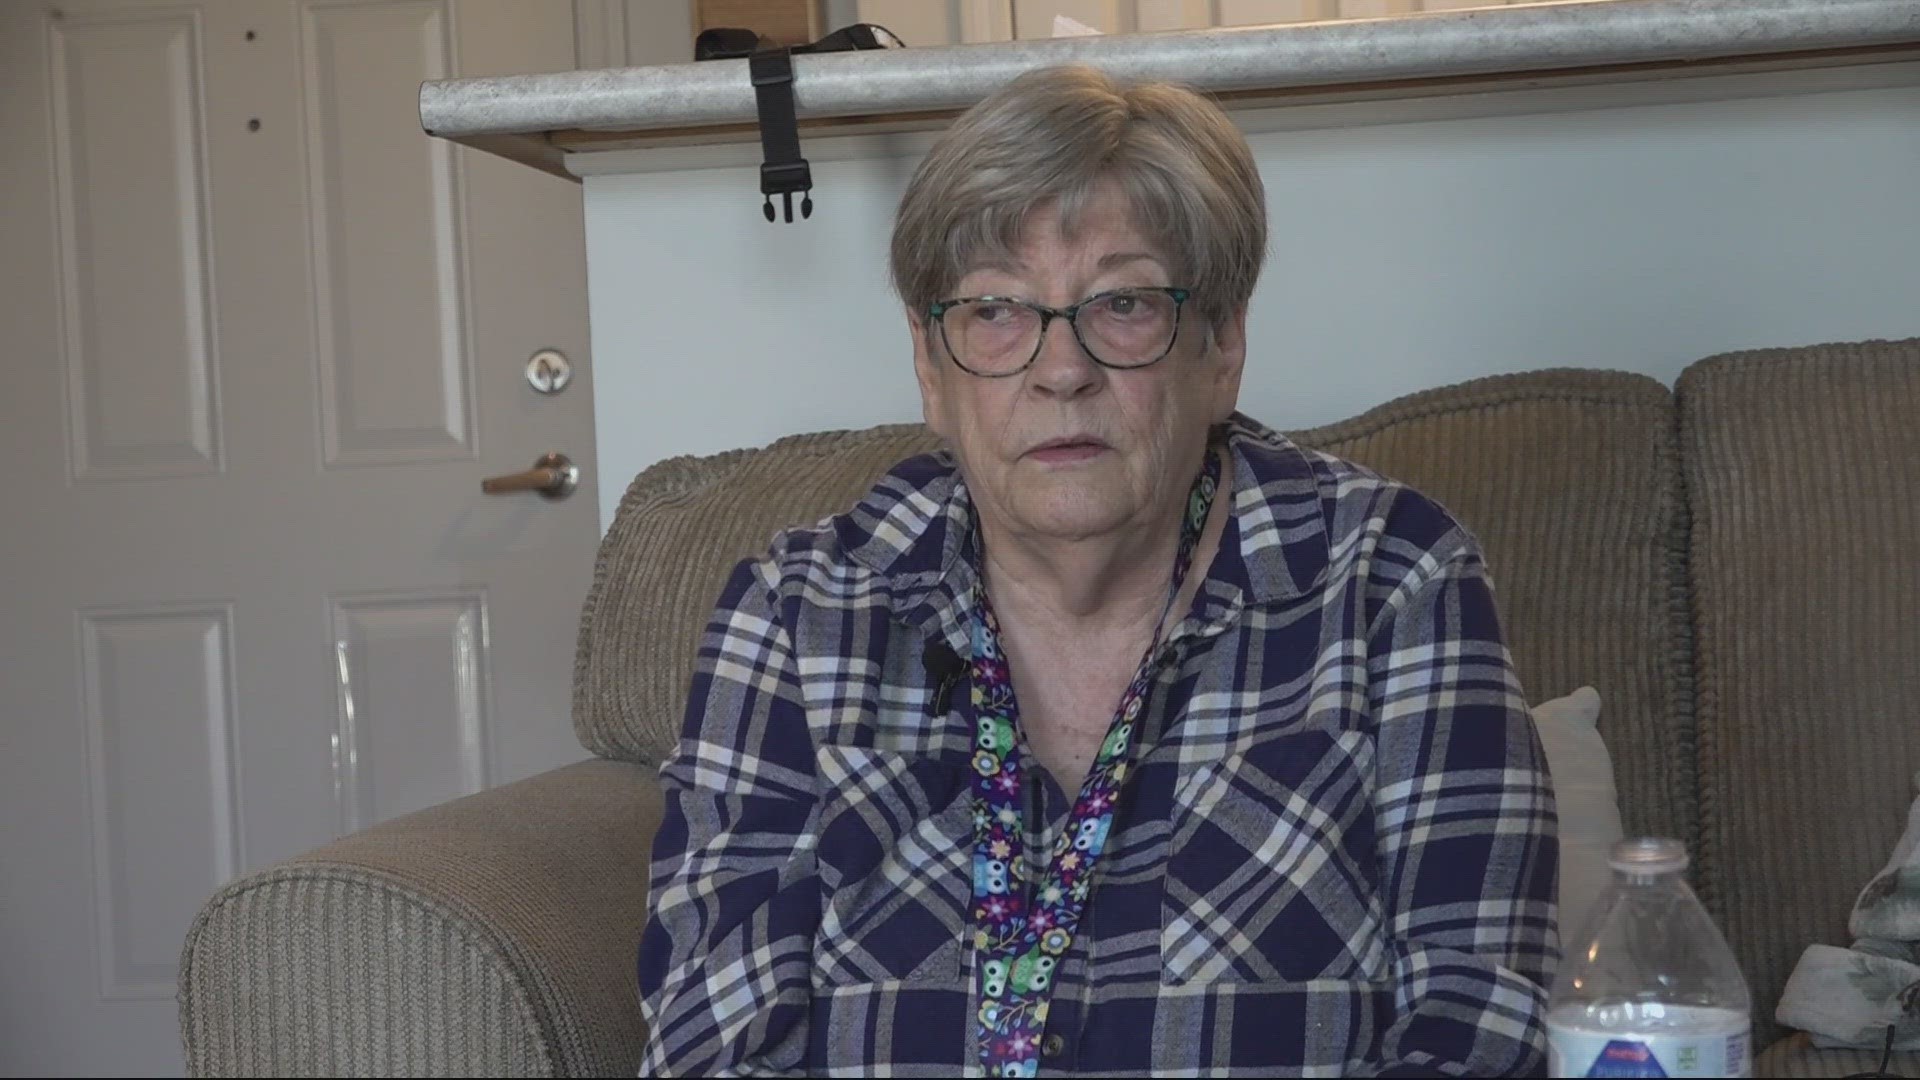 Colleen Mcmannis is a tenant at Rosewood Station. Her along with other tenants have been faced with challenges surrounding the neglect of elevator repairs.